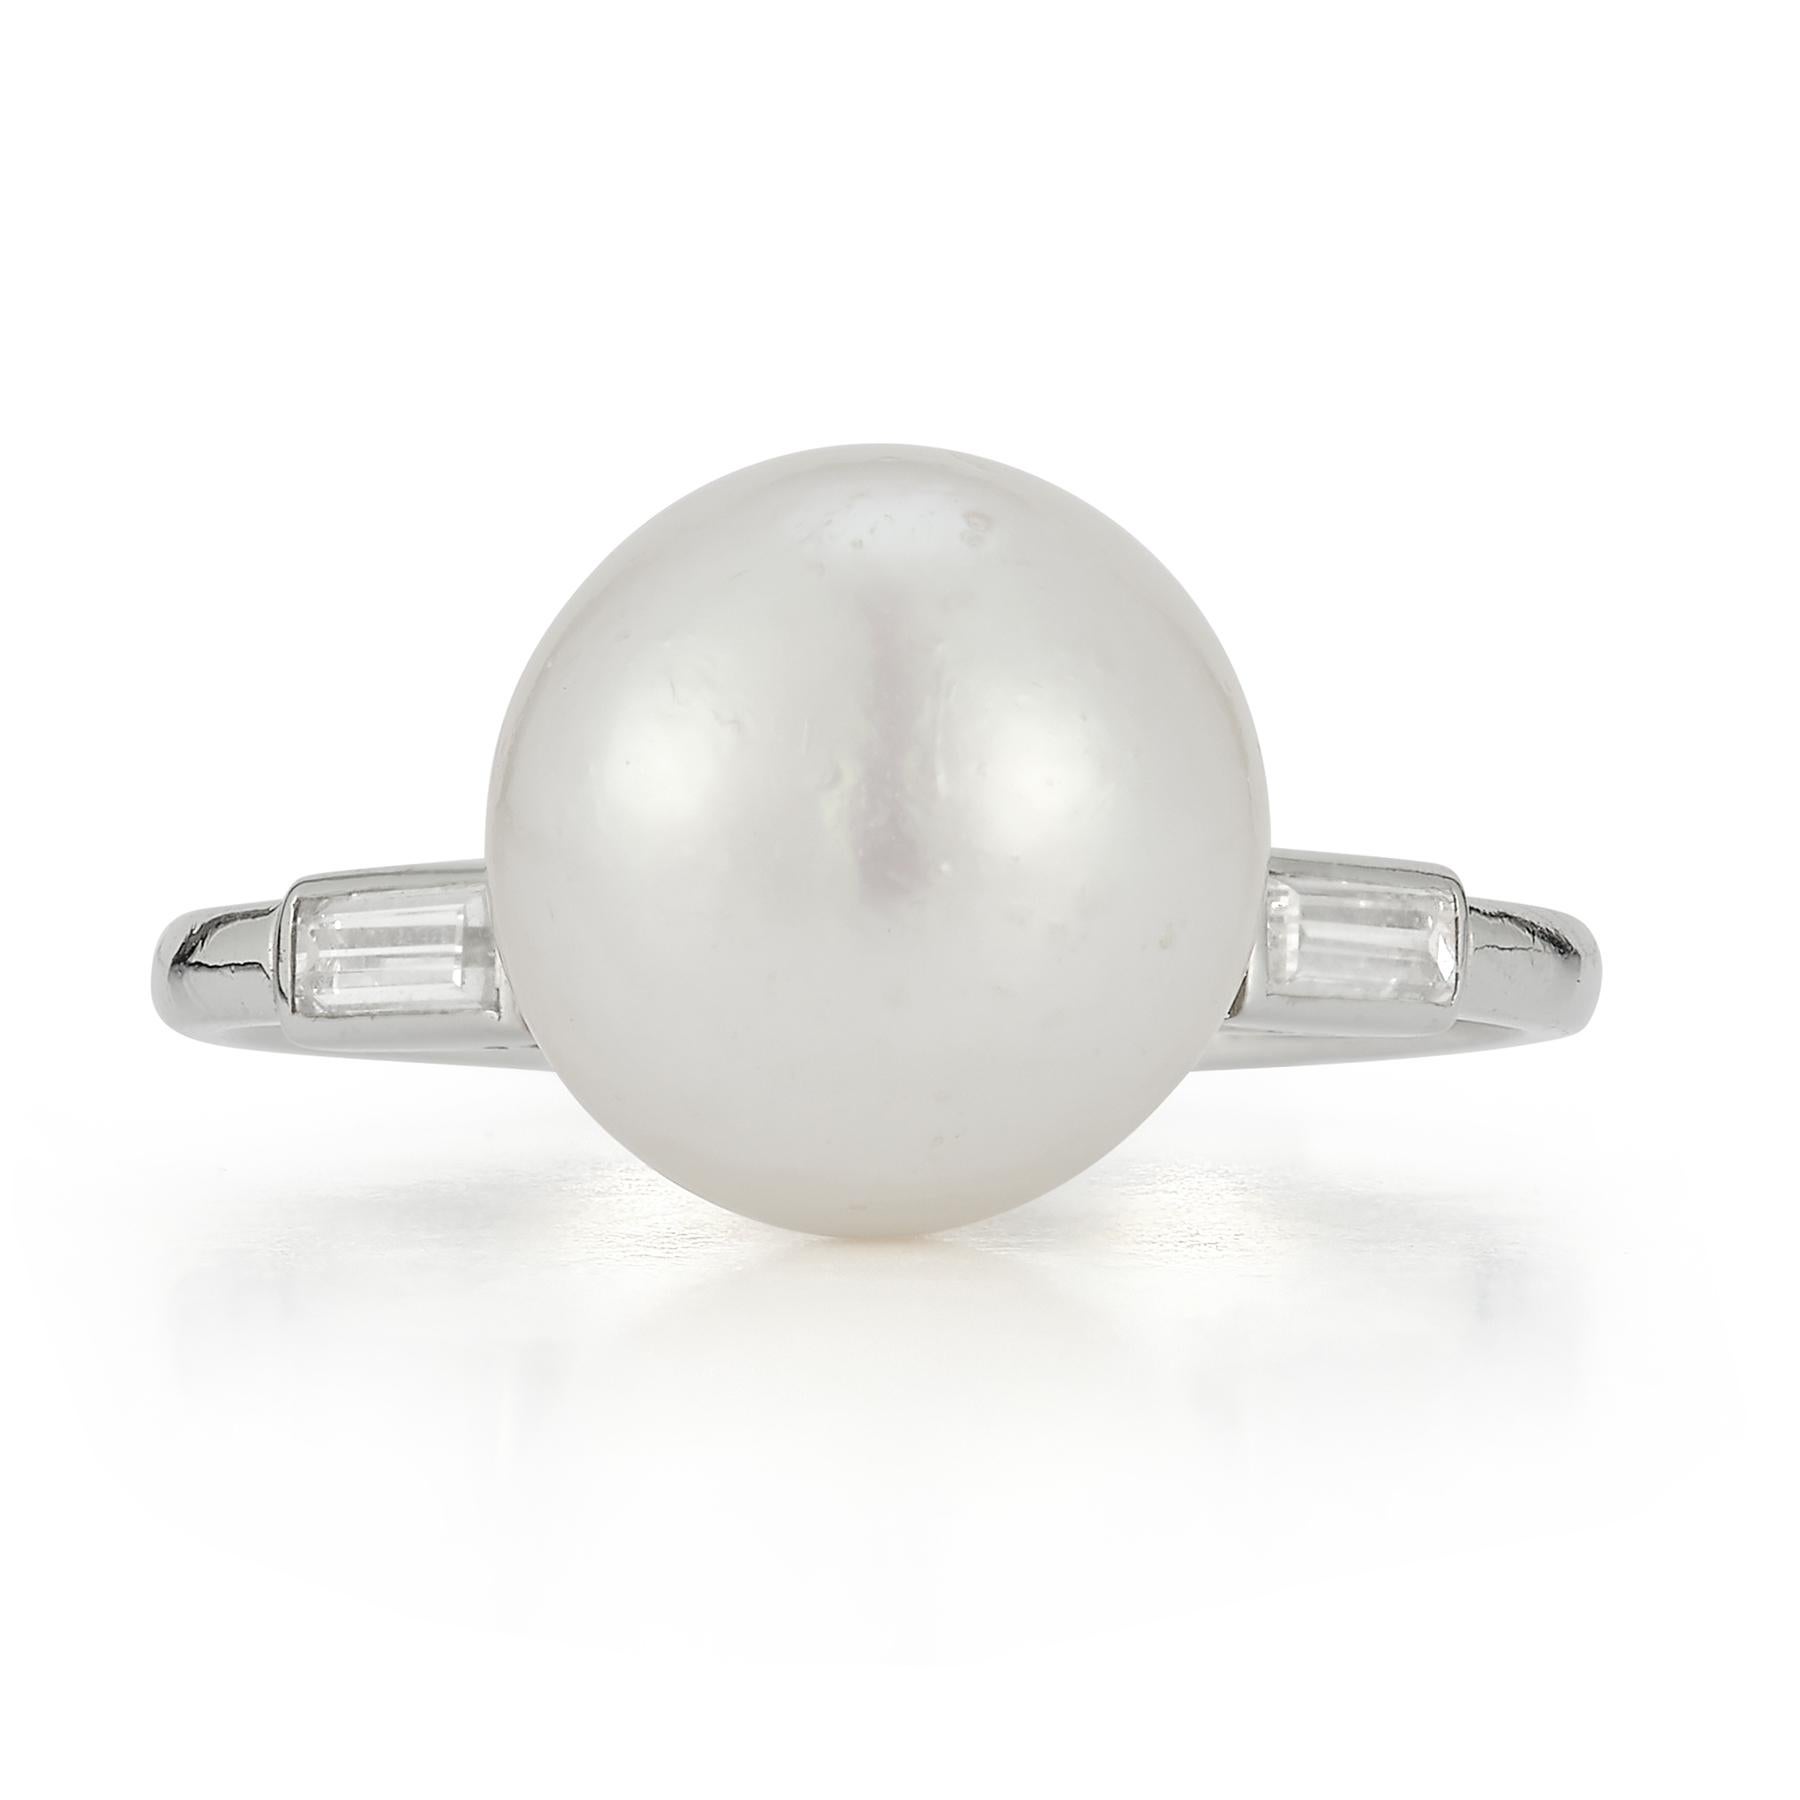 Certified Natural Oriental Pearl Ring 

1 pearl alongside 2 baguette cut diamonds set in platinum.

Ring Size: 5.75

Resizable free of charge

With SSEF laboratory report